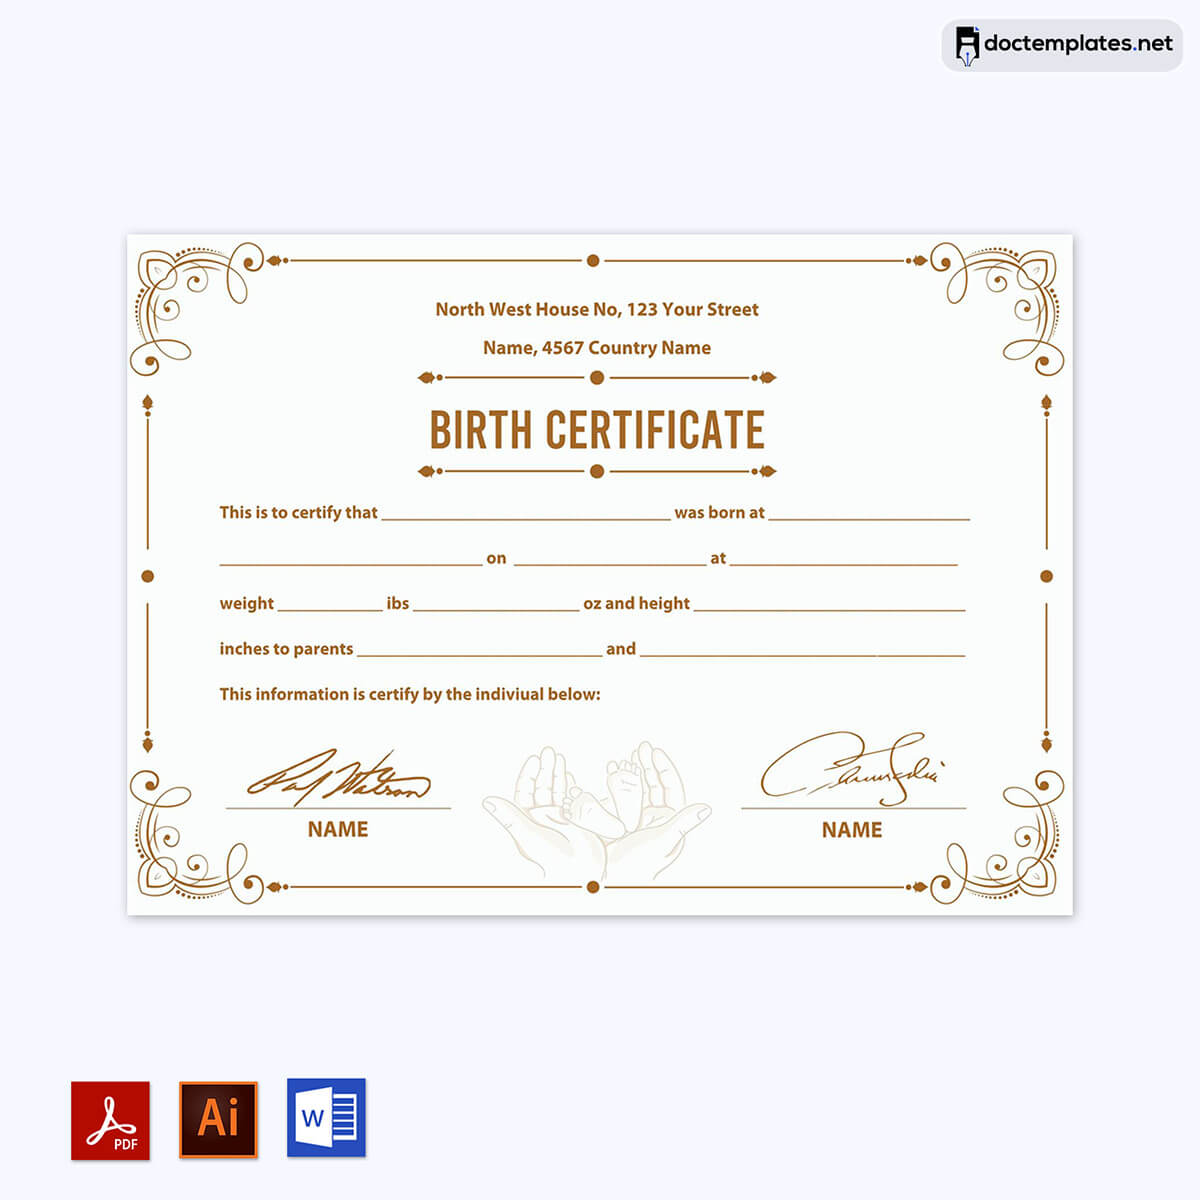 Image of Fillable birth certificate template
Fillable birth certificate template
